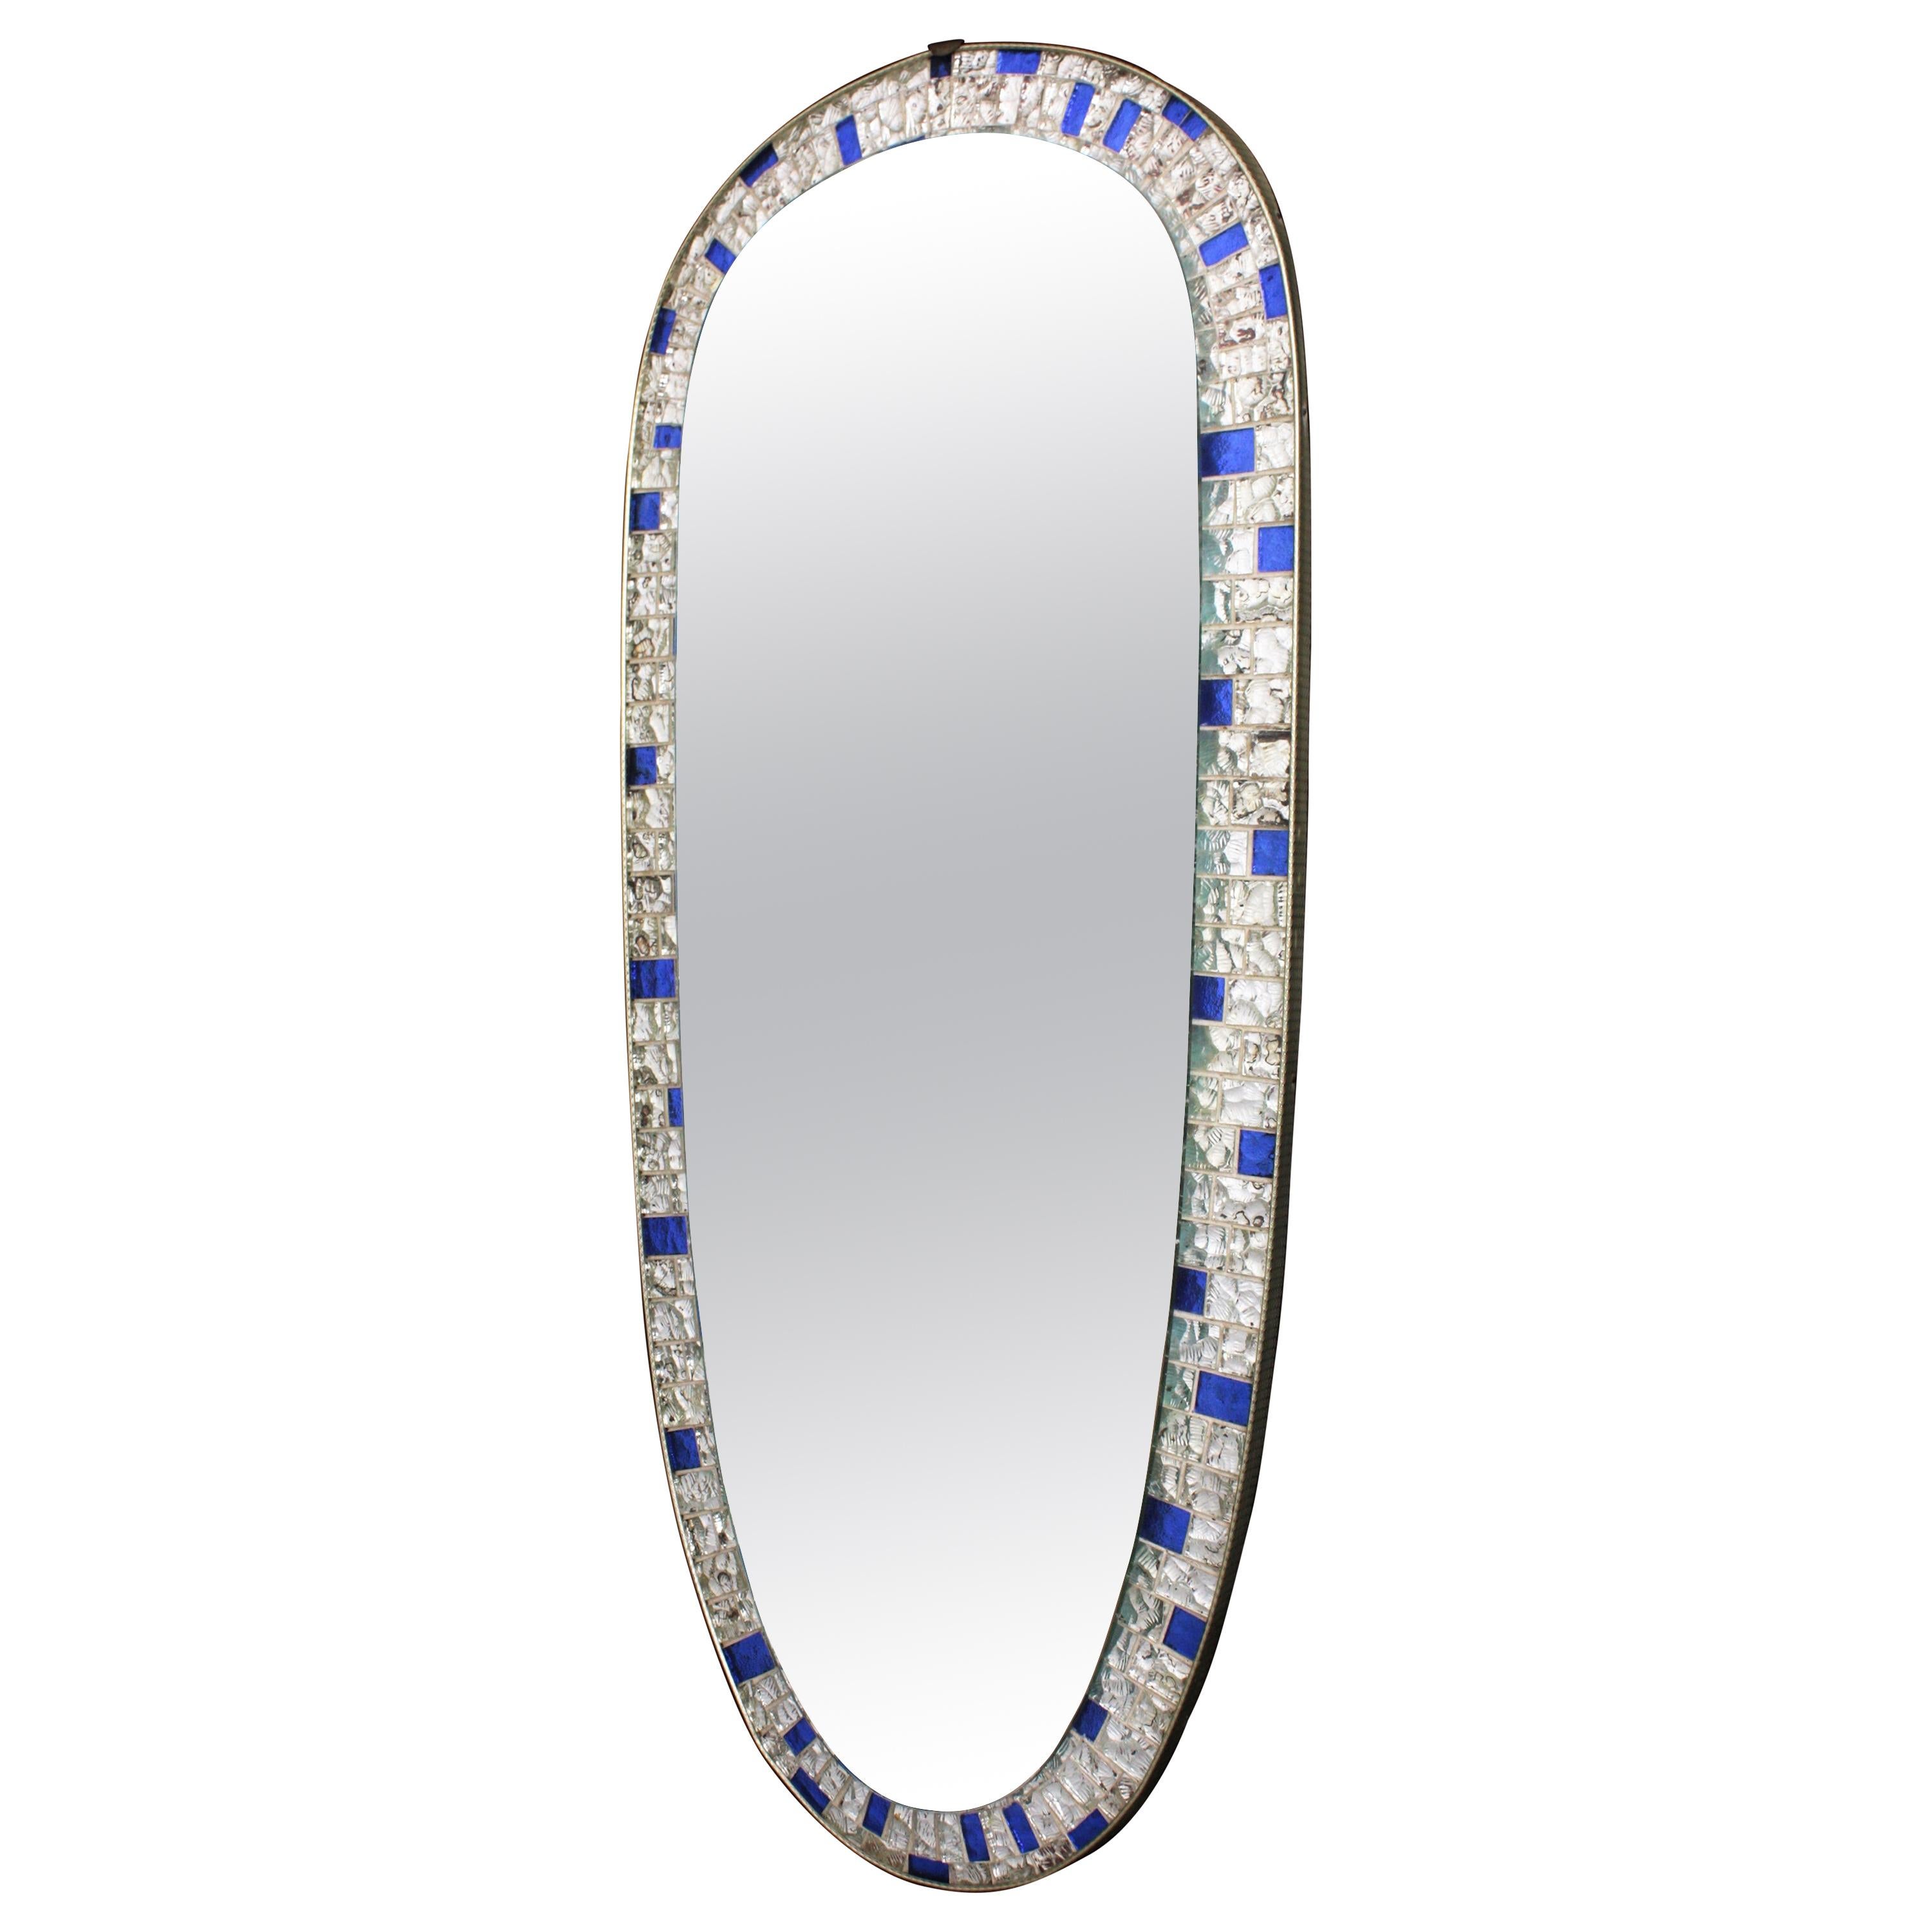 Spanish Modernist Oval Mosaic Mirror with Silver and Blue Mirrored Glasses